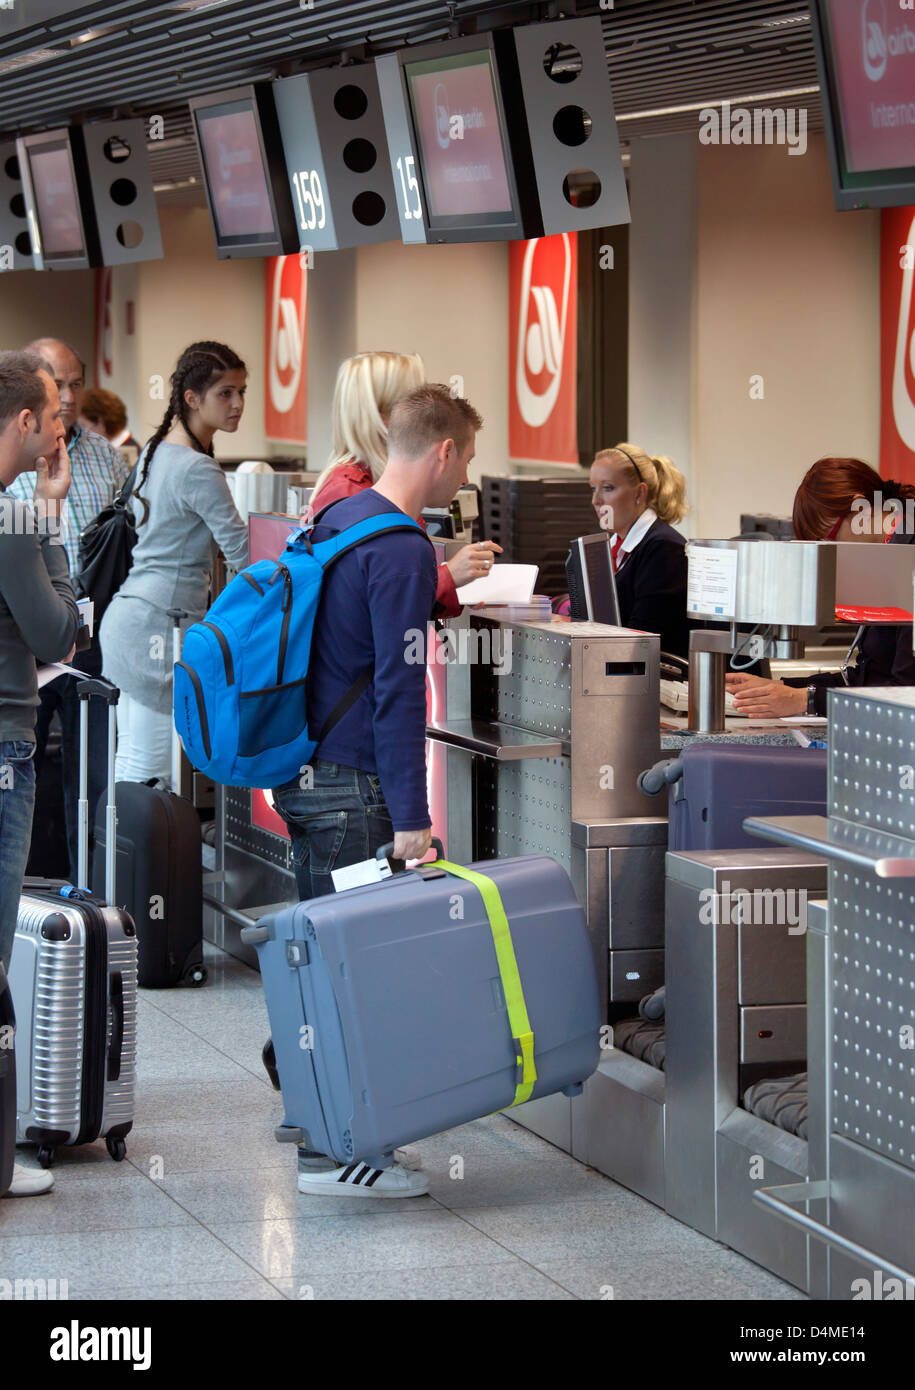 Check In Desk Stock Photos Check In Desk Stock Images Alamy